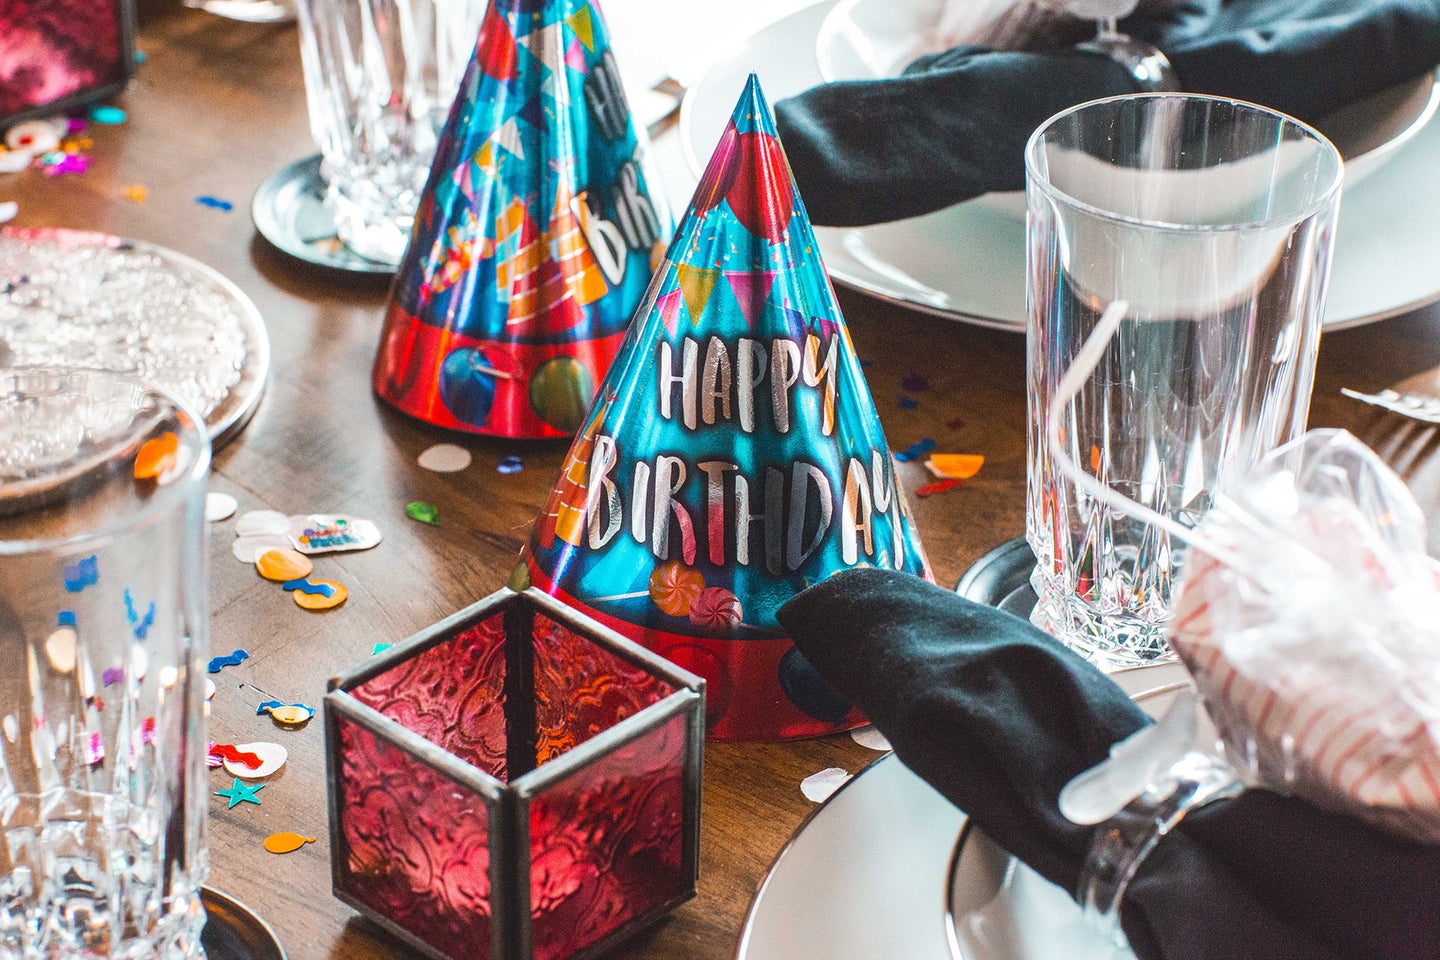 table with birthday hats and other festive items